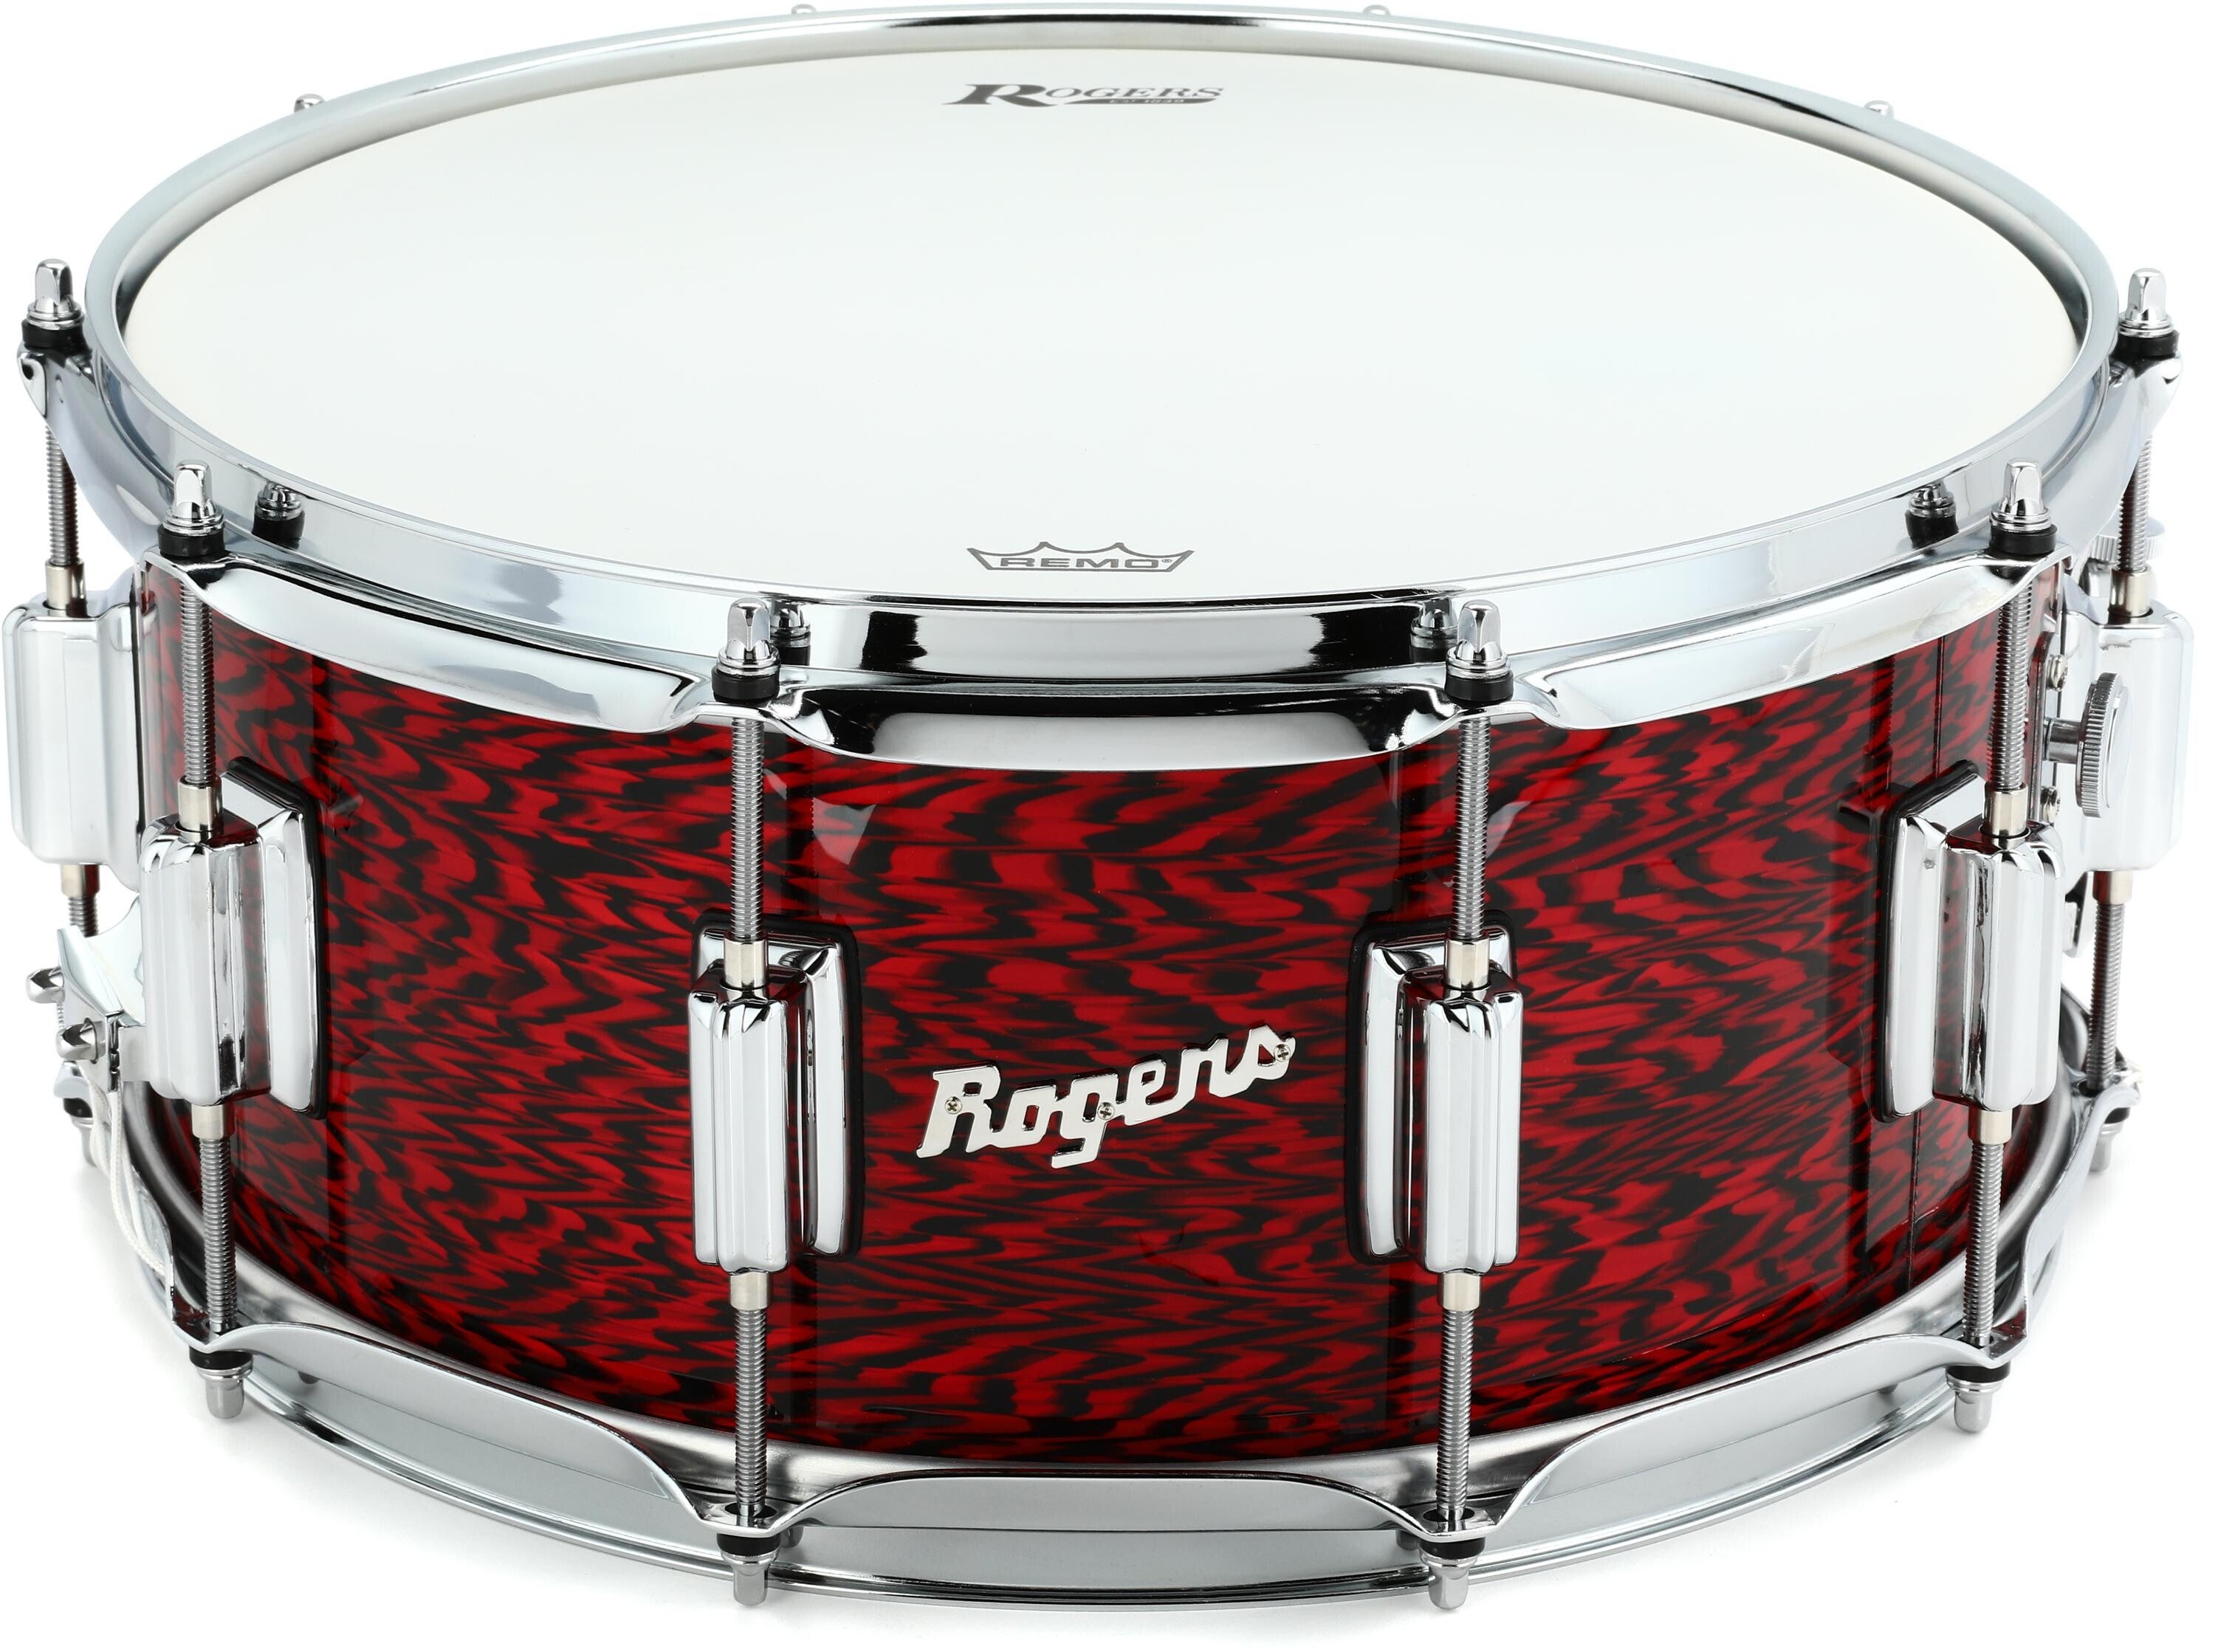 SuperTen Snare Drum - 6.5 x 14-inch - Red Onyx - Sweetwater